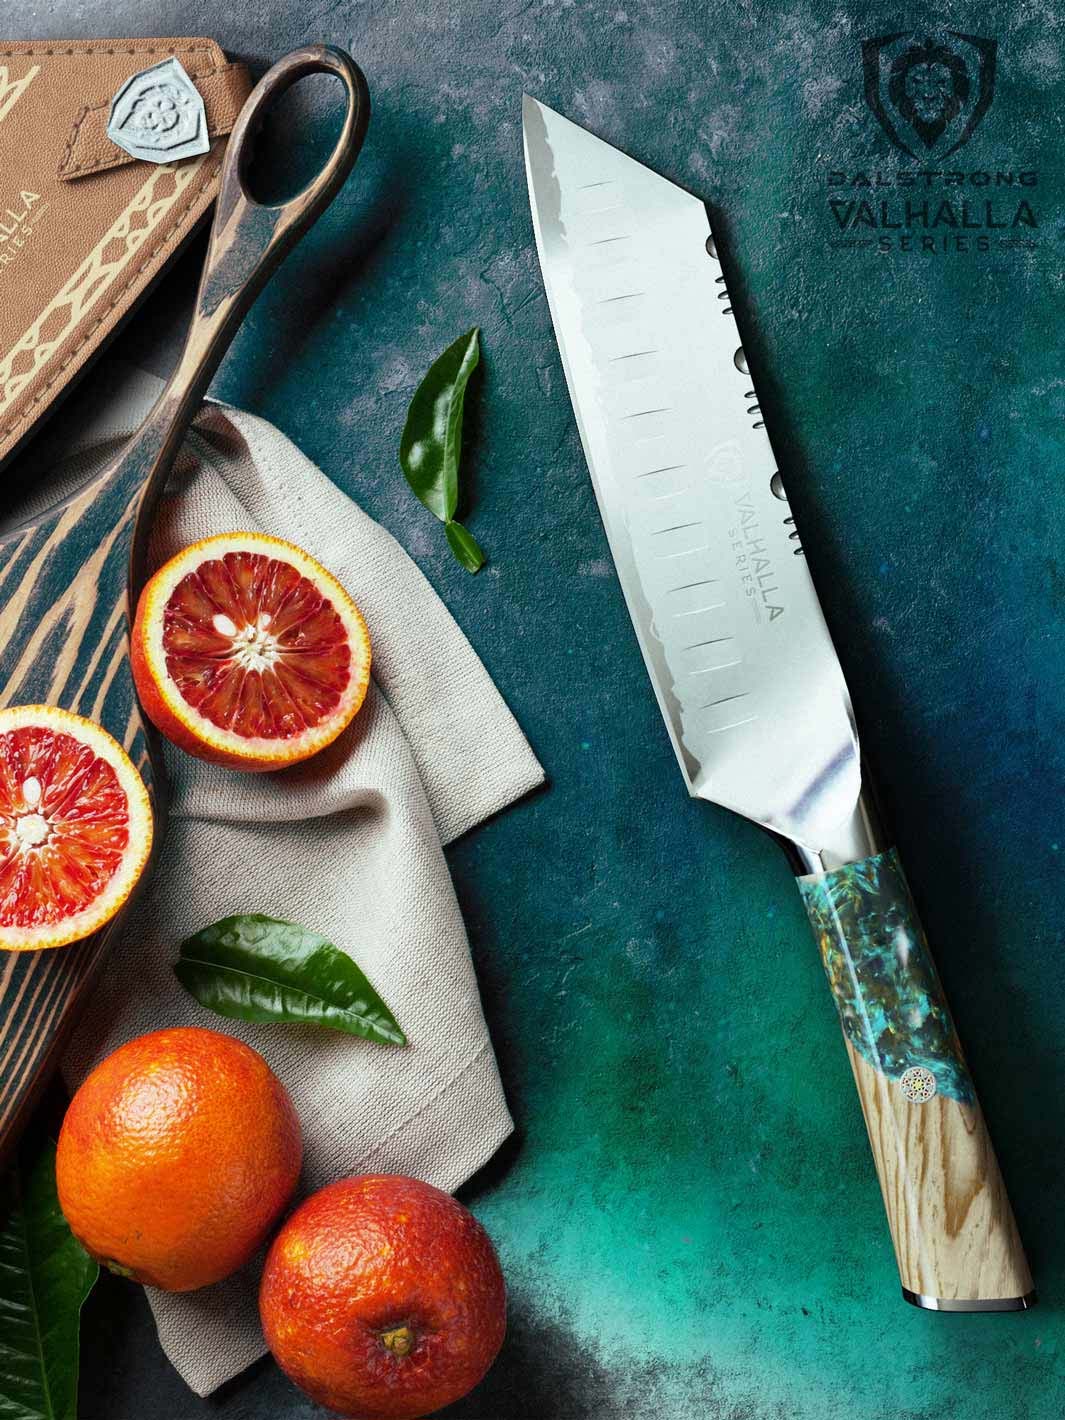 Dalstrong valhalla series 7 inch santoku knife with wooden handle and sheath beside slices of orange.